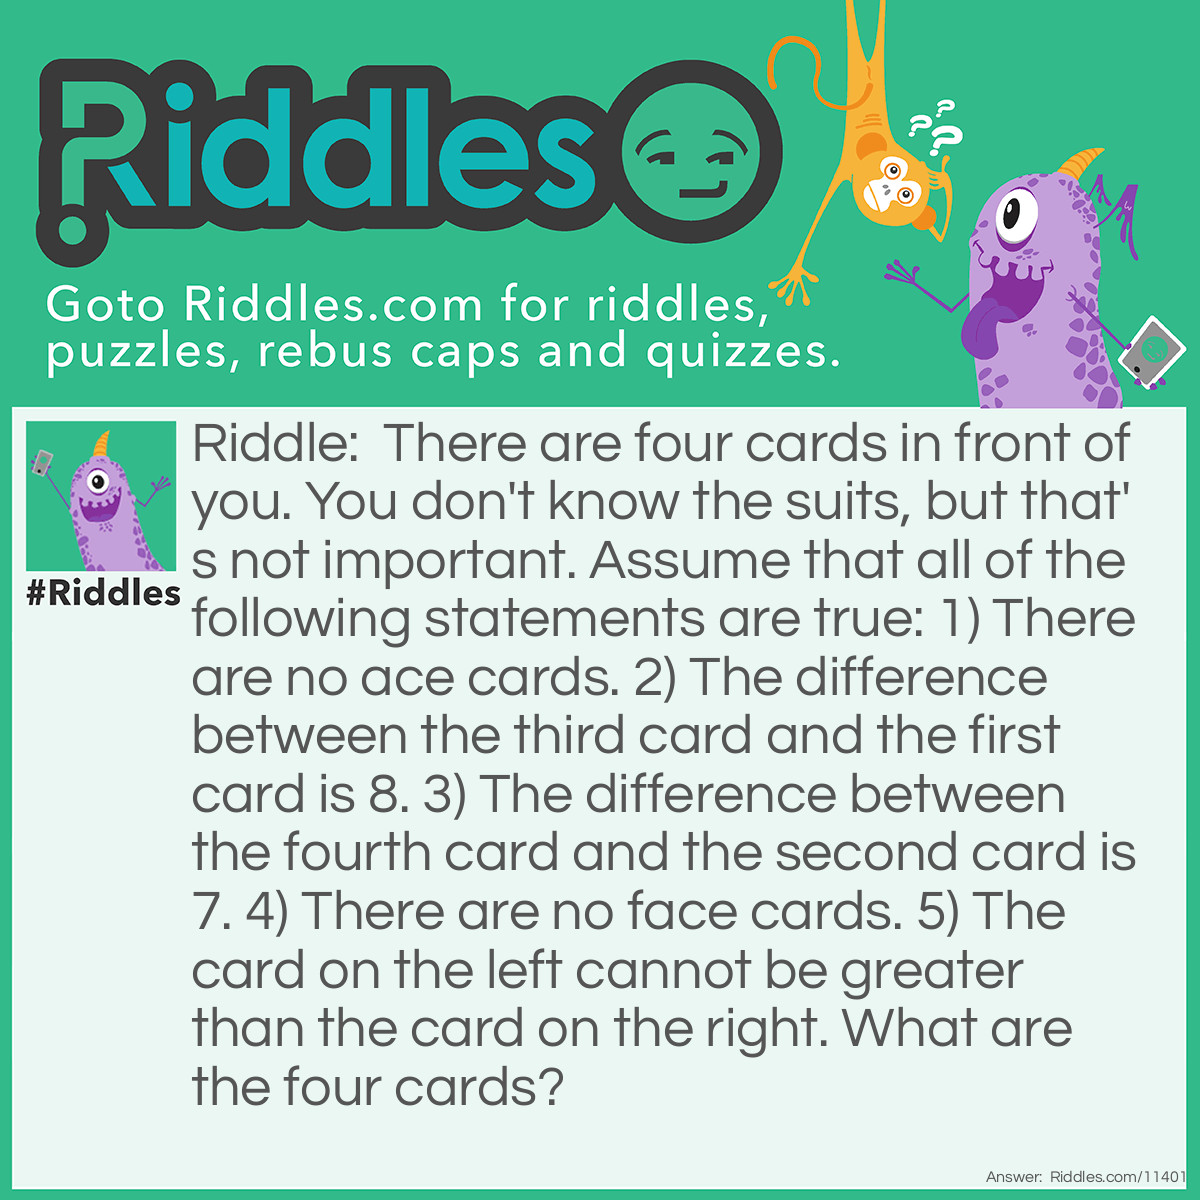 Riddle: There are four cards in front of you. You don't know the suits, but that's not important. Assume that all of the following statements are true: 1) There are no ace cards. 2) The difference between the third card and the first card is 8. 3) The difference between the fourth card and the second card is 7. 4) There are no face cards. 5) The card on the left cannot be greater than the card on the right. What are the four cards? Answer: The card on the far left is a 2, the card next to it is a 3, then there is a 10, and there is a 10 next to the first 10 card. Hey, I didn't say there couldn't be any cards of the SAME value!